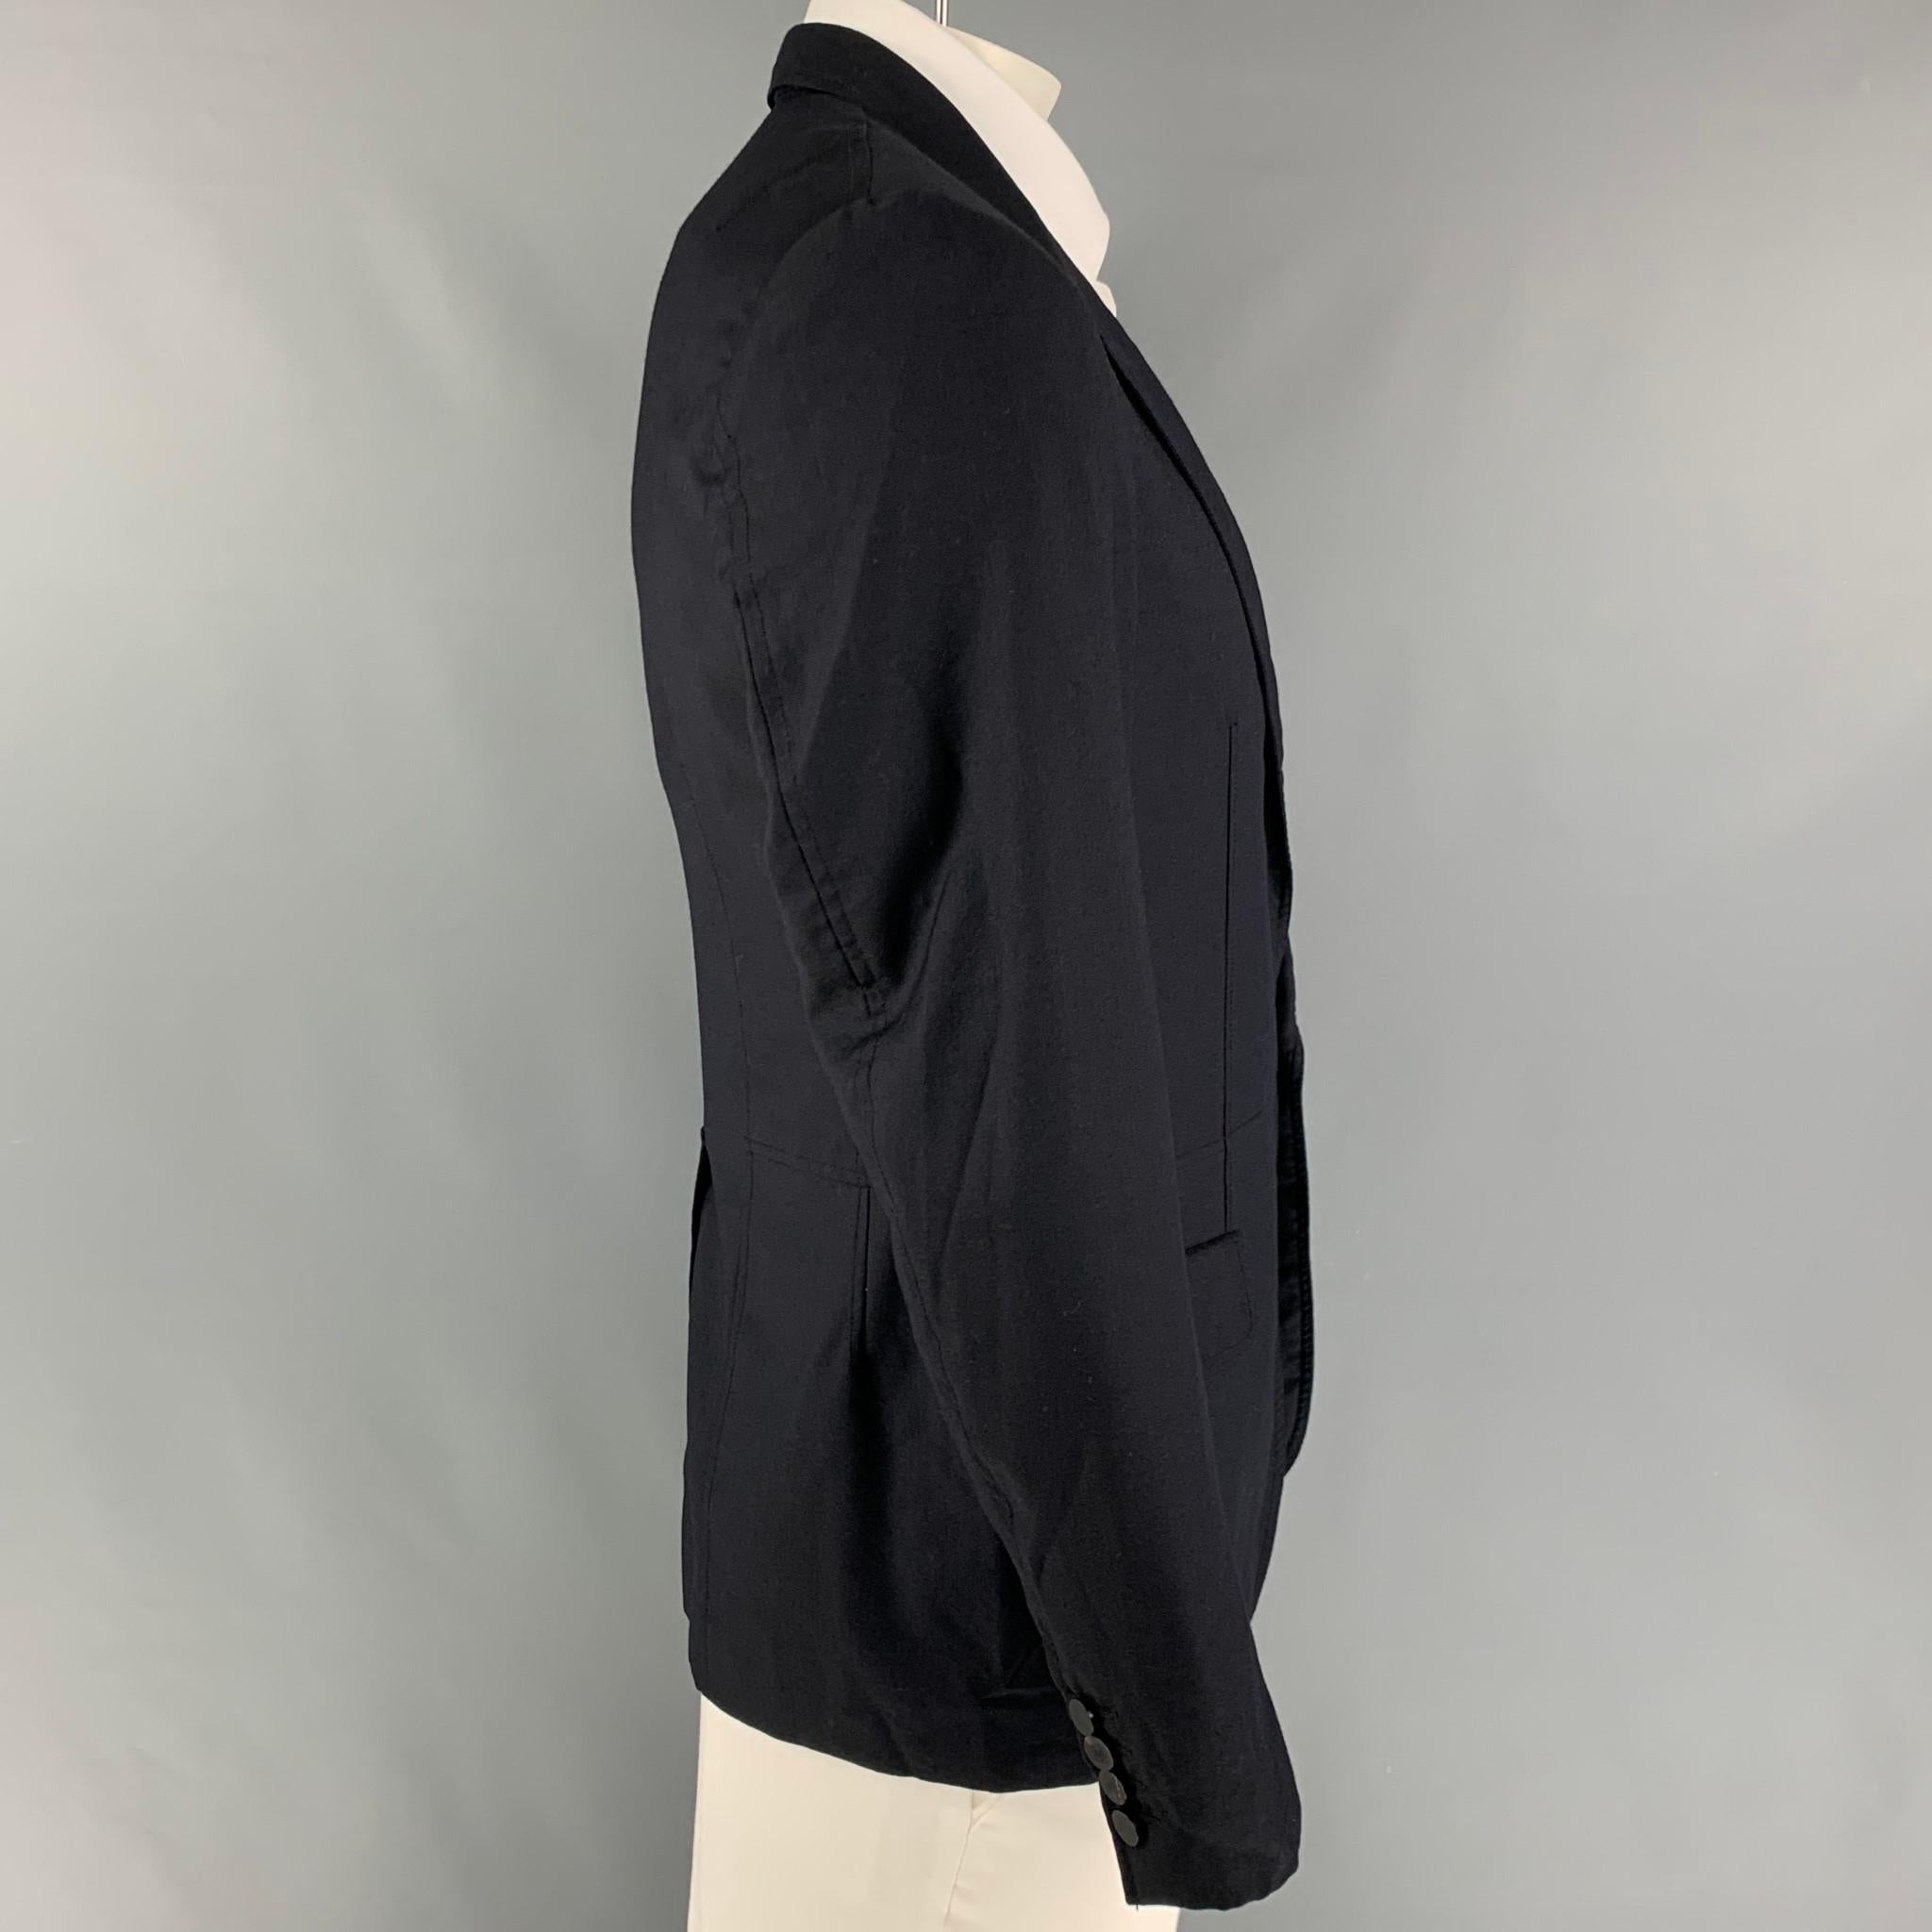 LANVIN sport coat comes in a navy cupro with a full liner featuring a notch lapel, flap pockets, single back vent, and a single button closure. Made in Italy. 

Very Good Pre-Owned Condition.
Marked: 52

Measurements:

Shoulder: 17 in.
Chest: 42